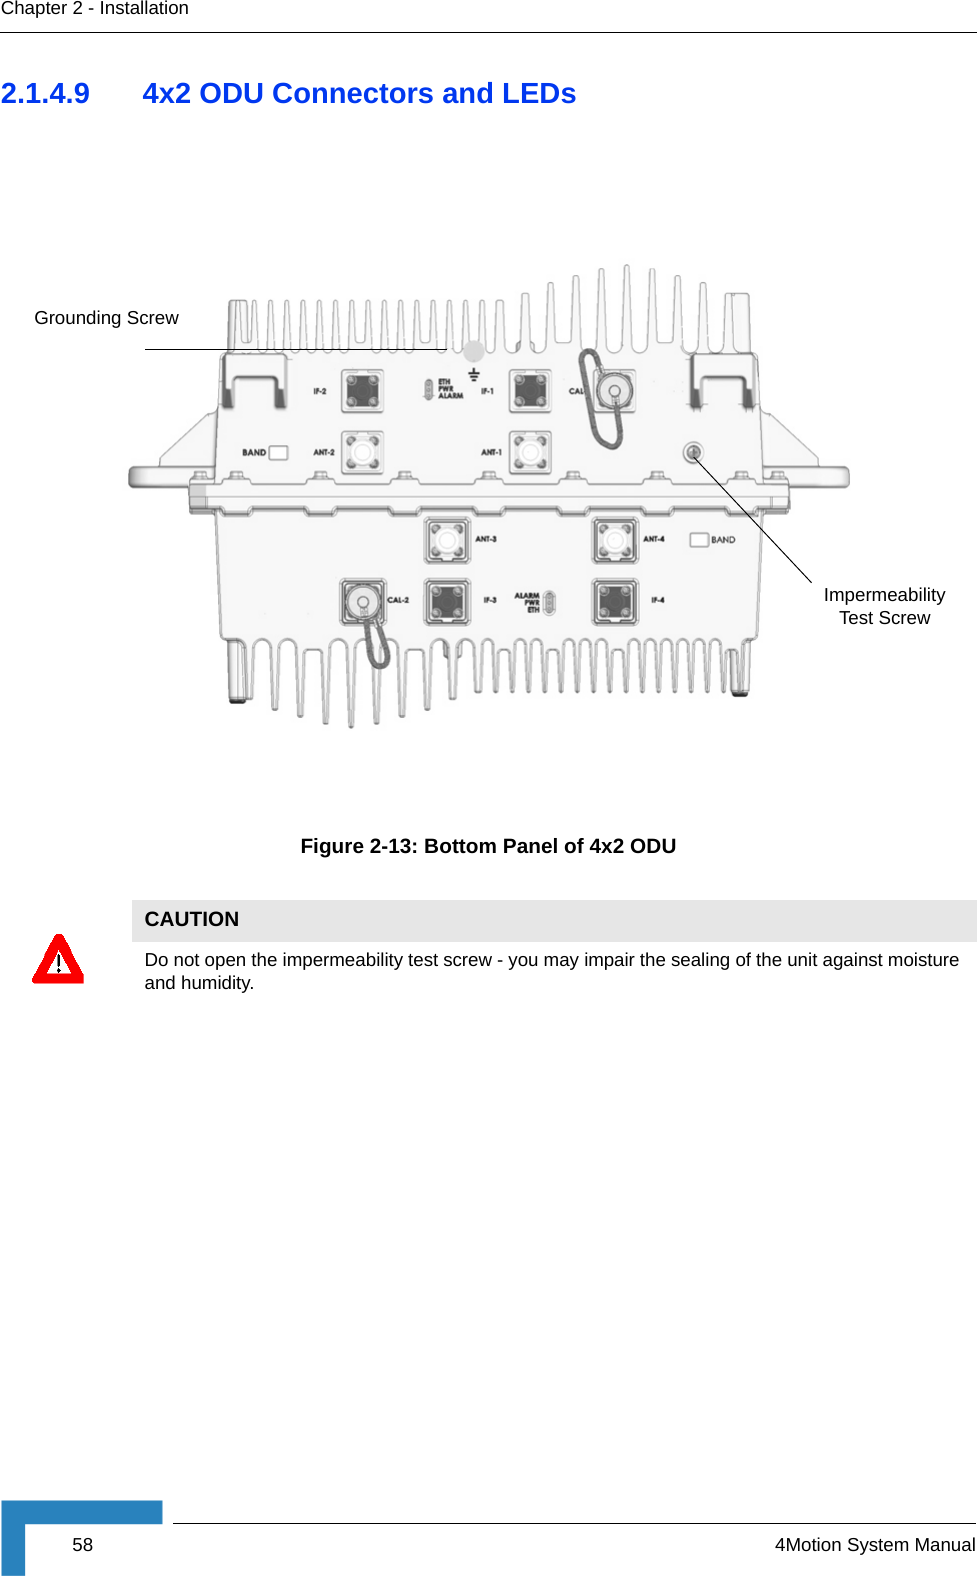 58 4Motion System ManualChapter 2 - Installation2.1.4.9 4x2 ODU Connectors and LEDsFigure 2-13: Bottom Panel of 4x2 ODUCAUTIONDo not open the impermeability test screw - you may impair the sealing of the unit against moisture and humidity.Grounding ScrewImpermeability Test Screw